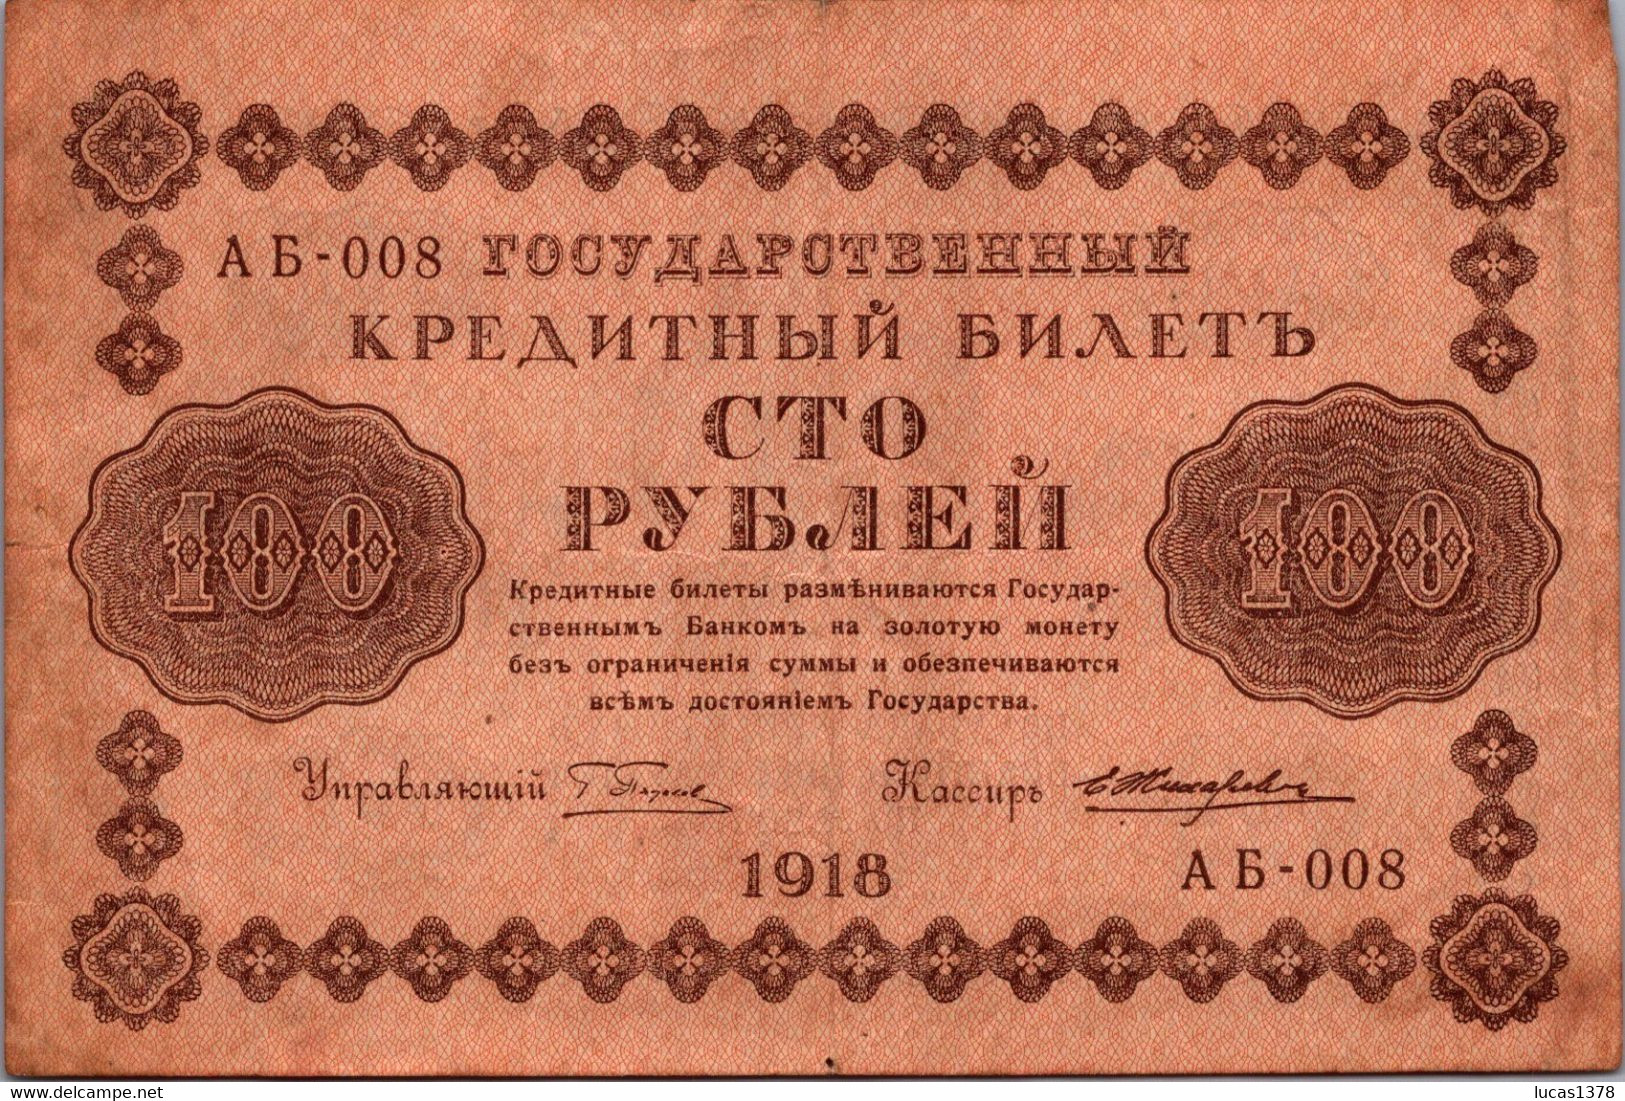 RUSSIE / URSS - Billet 100 ROUBLES 1918 / Right Signature: Zhikhariev - Russia